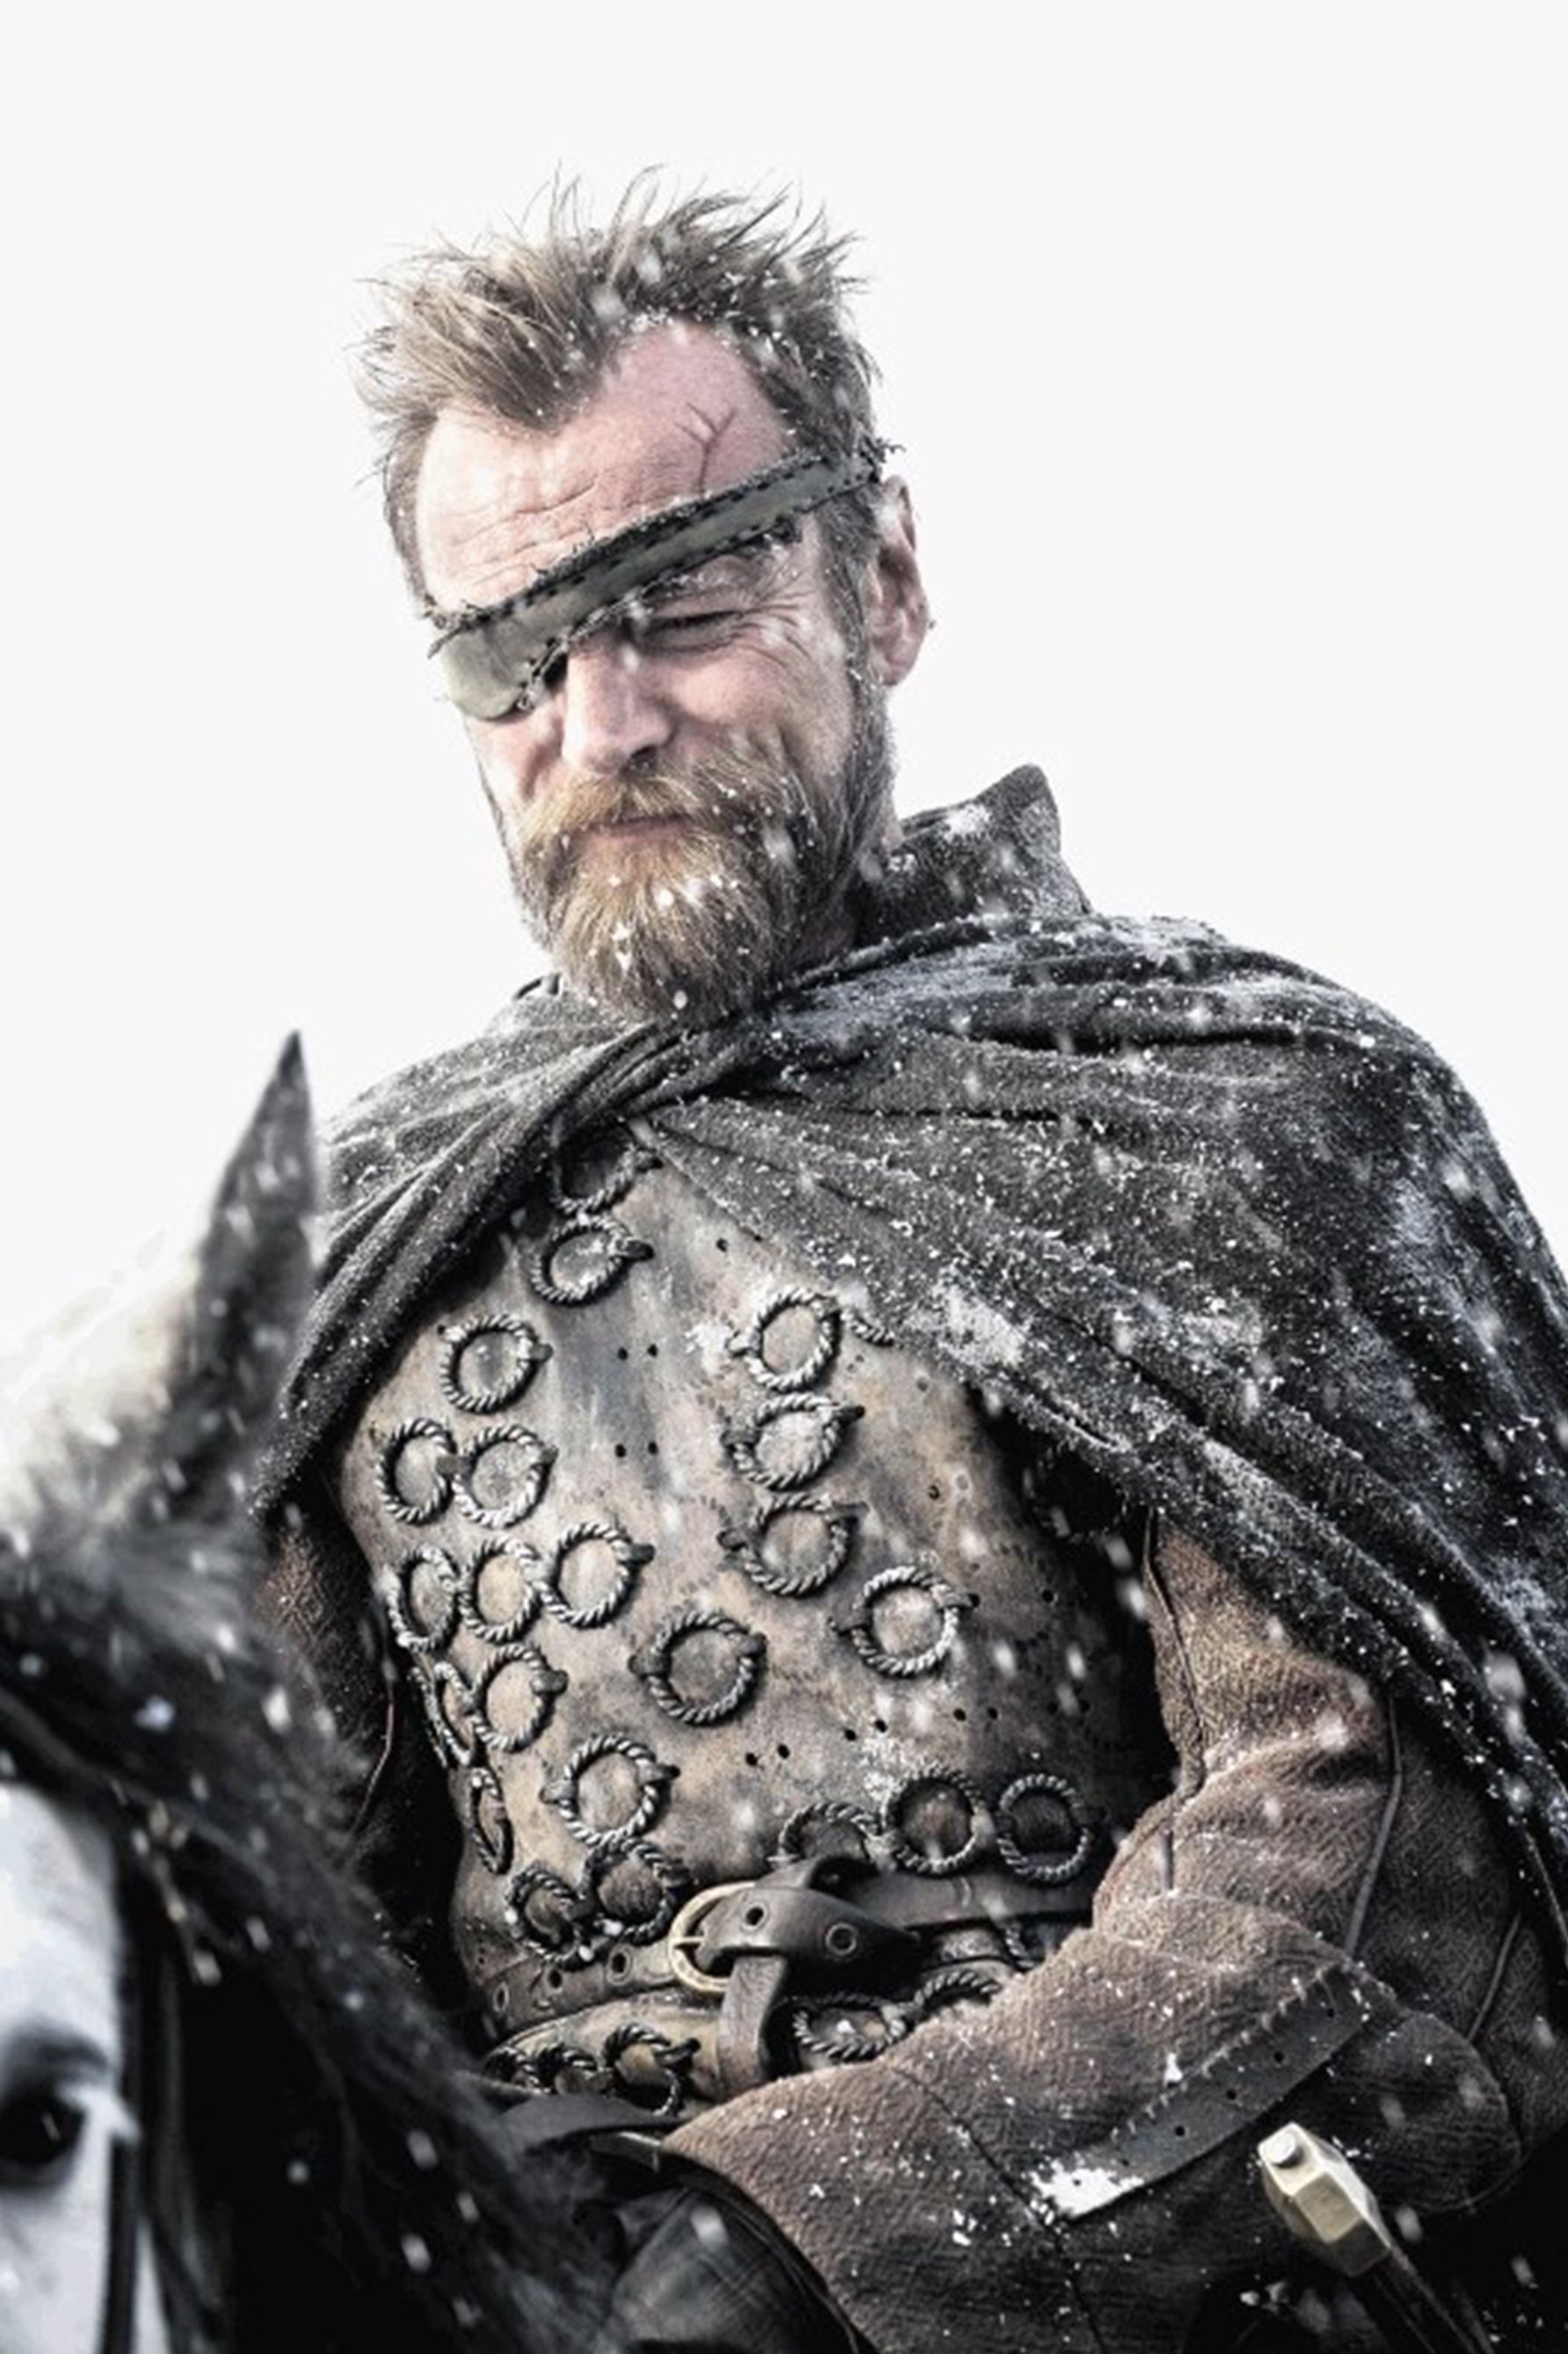 Too bad Sandor &quot;The Hound&quot; Clegane did not join Beric Dondar